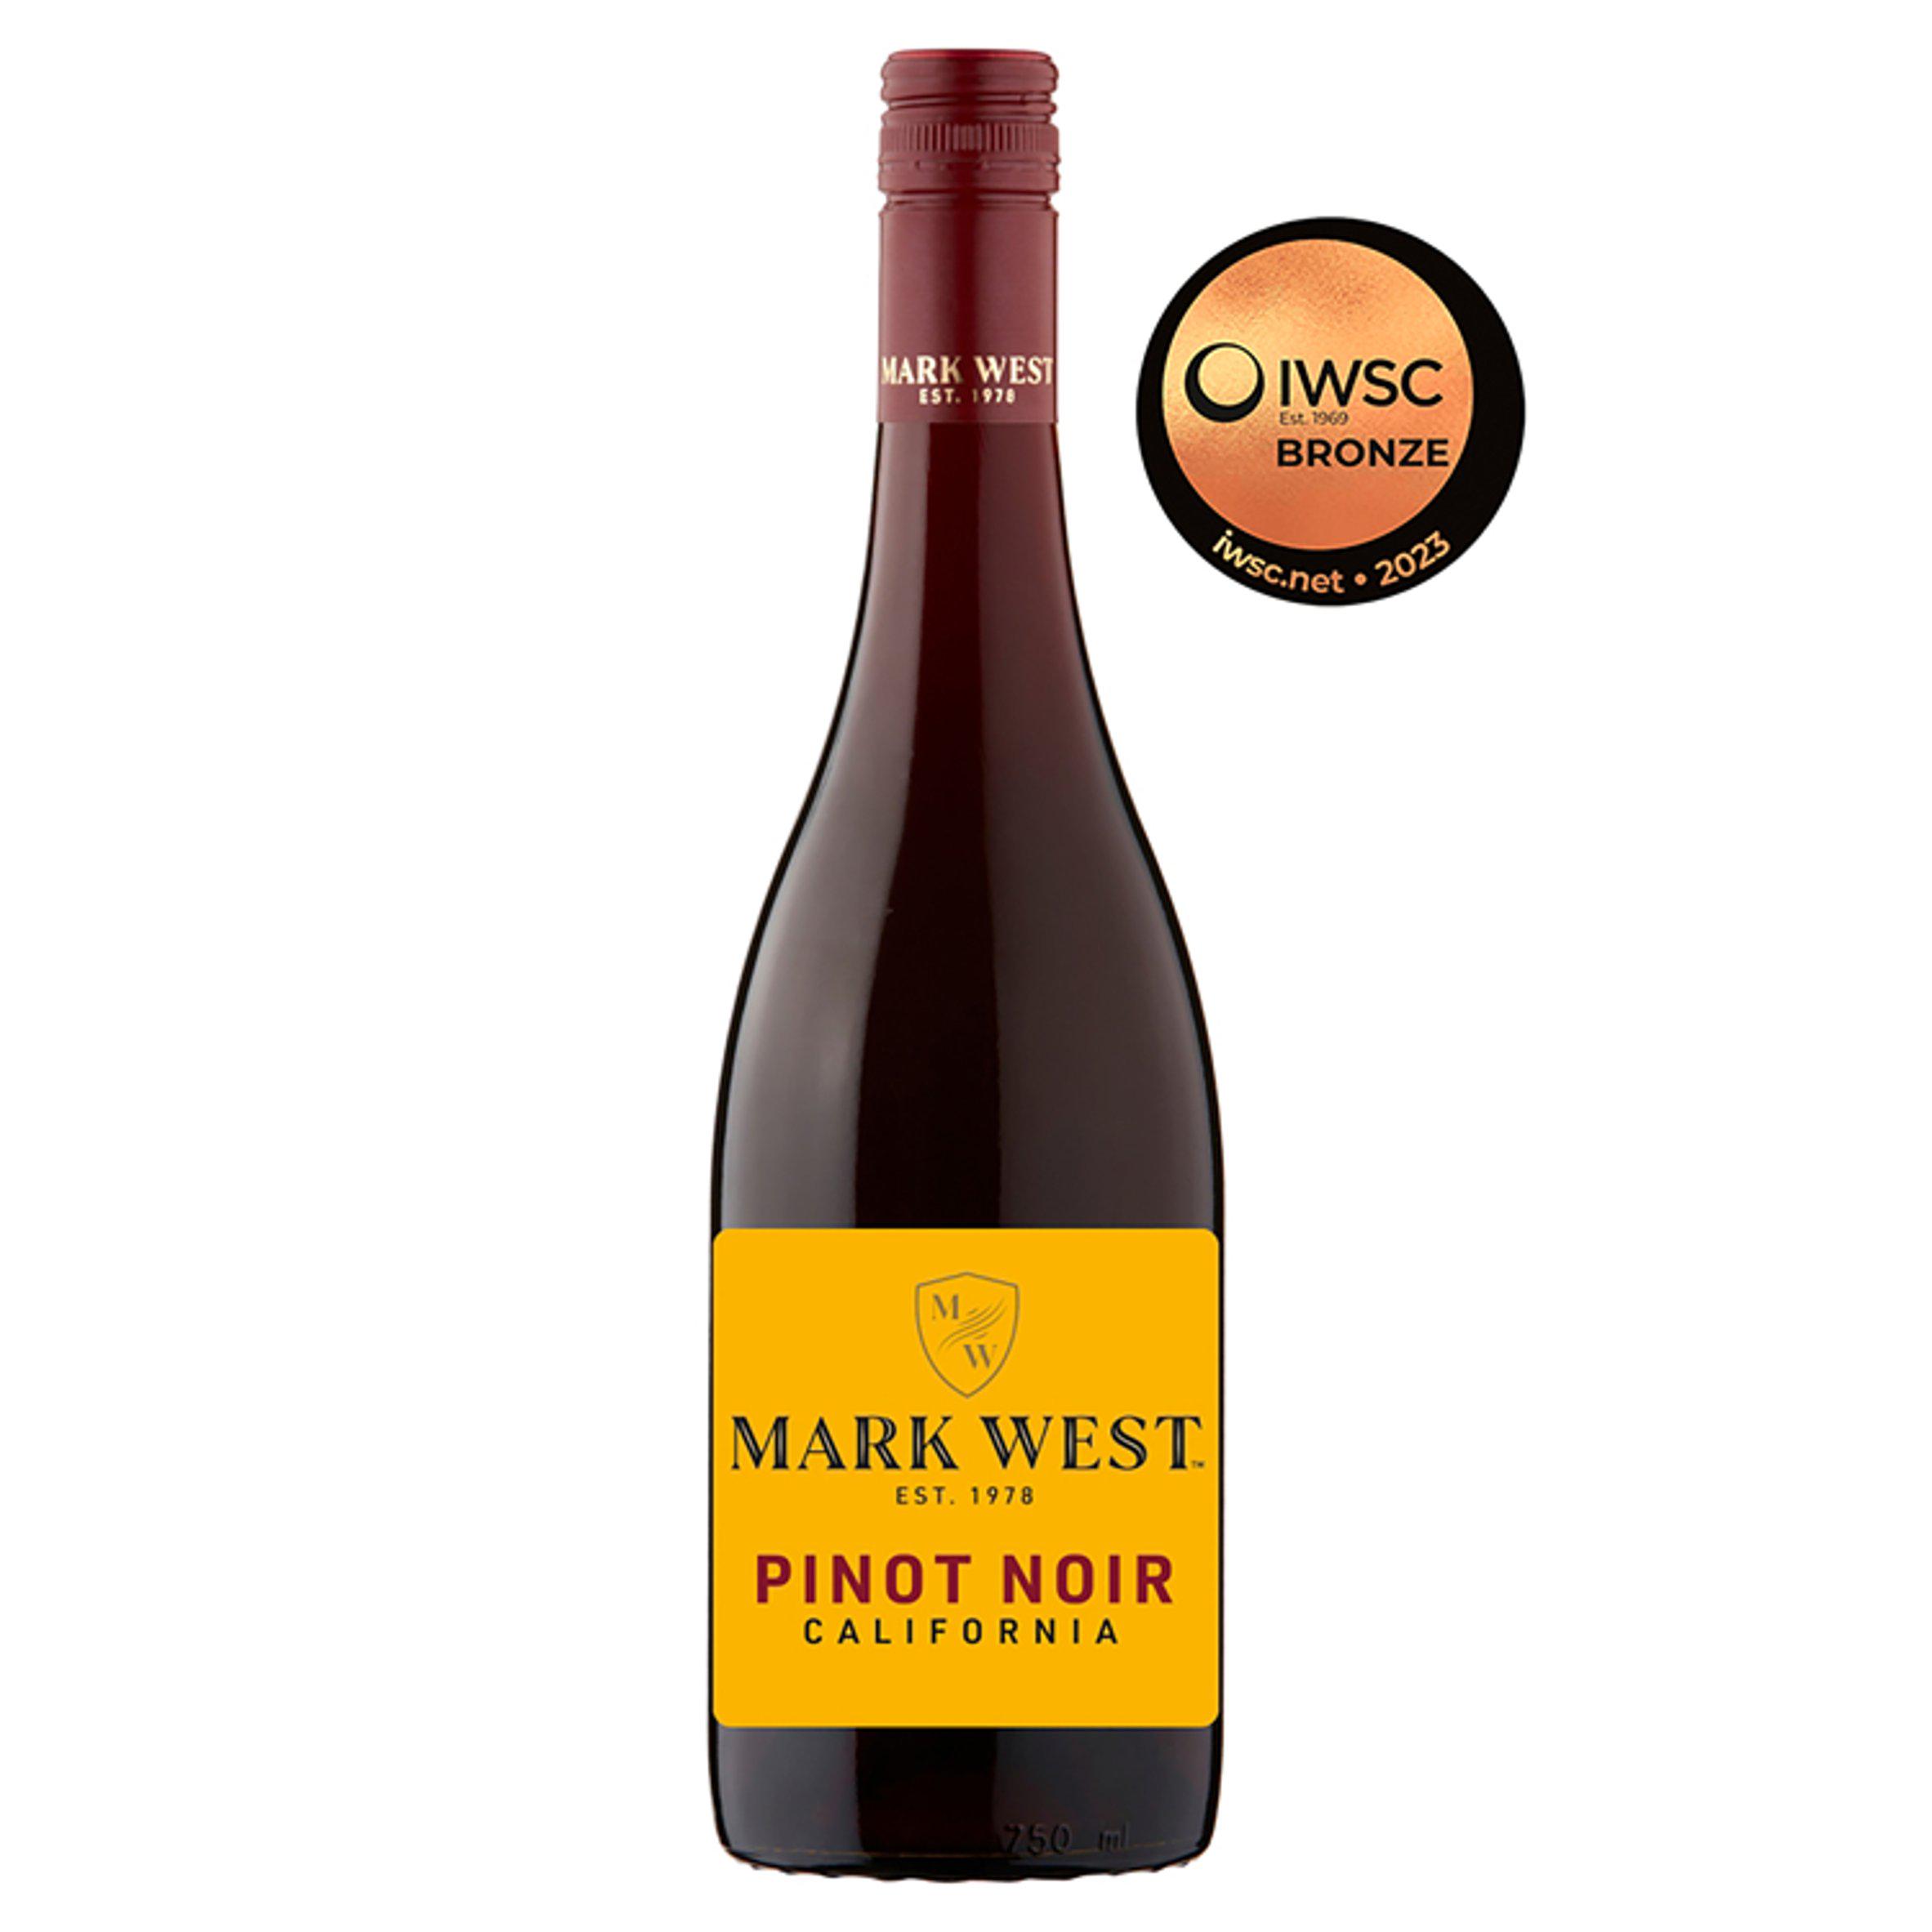 Image of Marc West pinot noir red wine in bottle on white background.